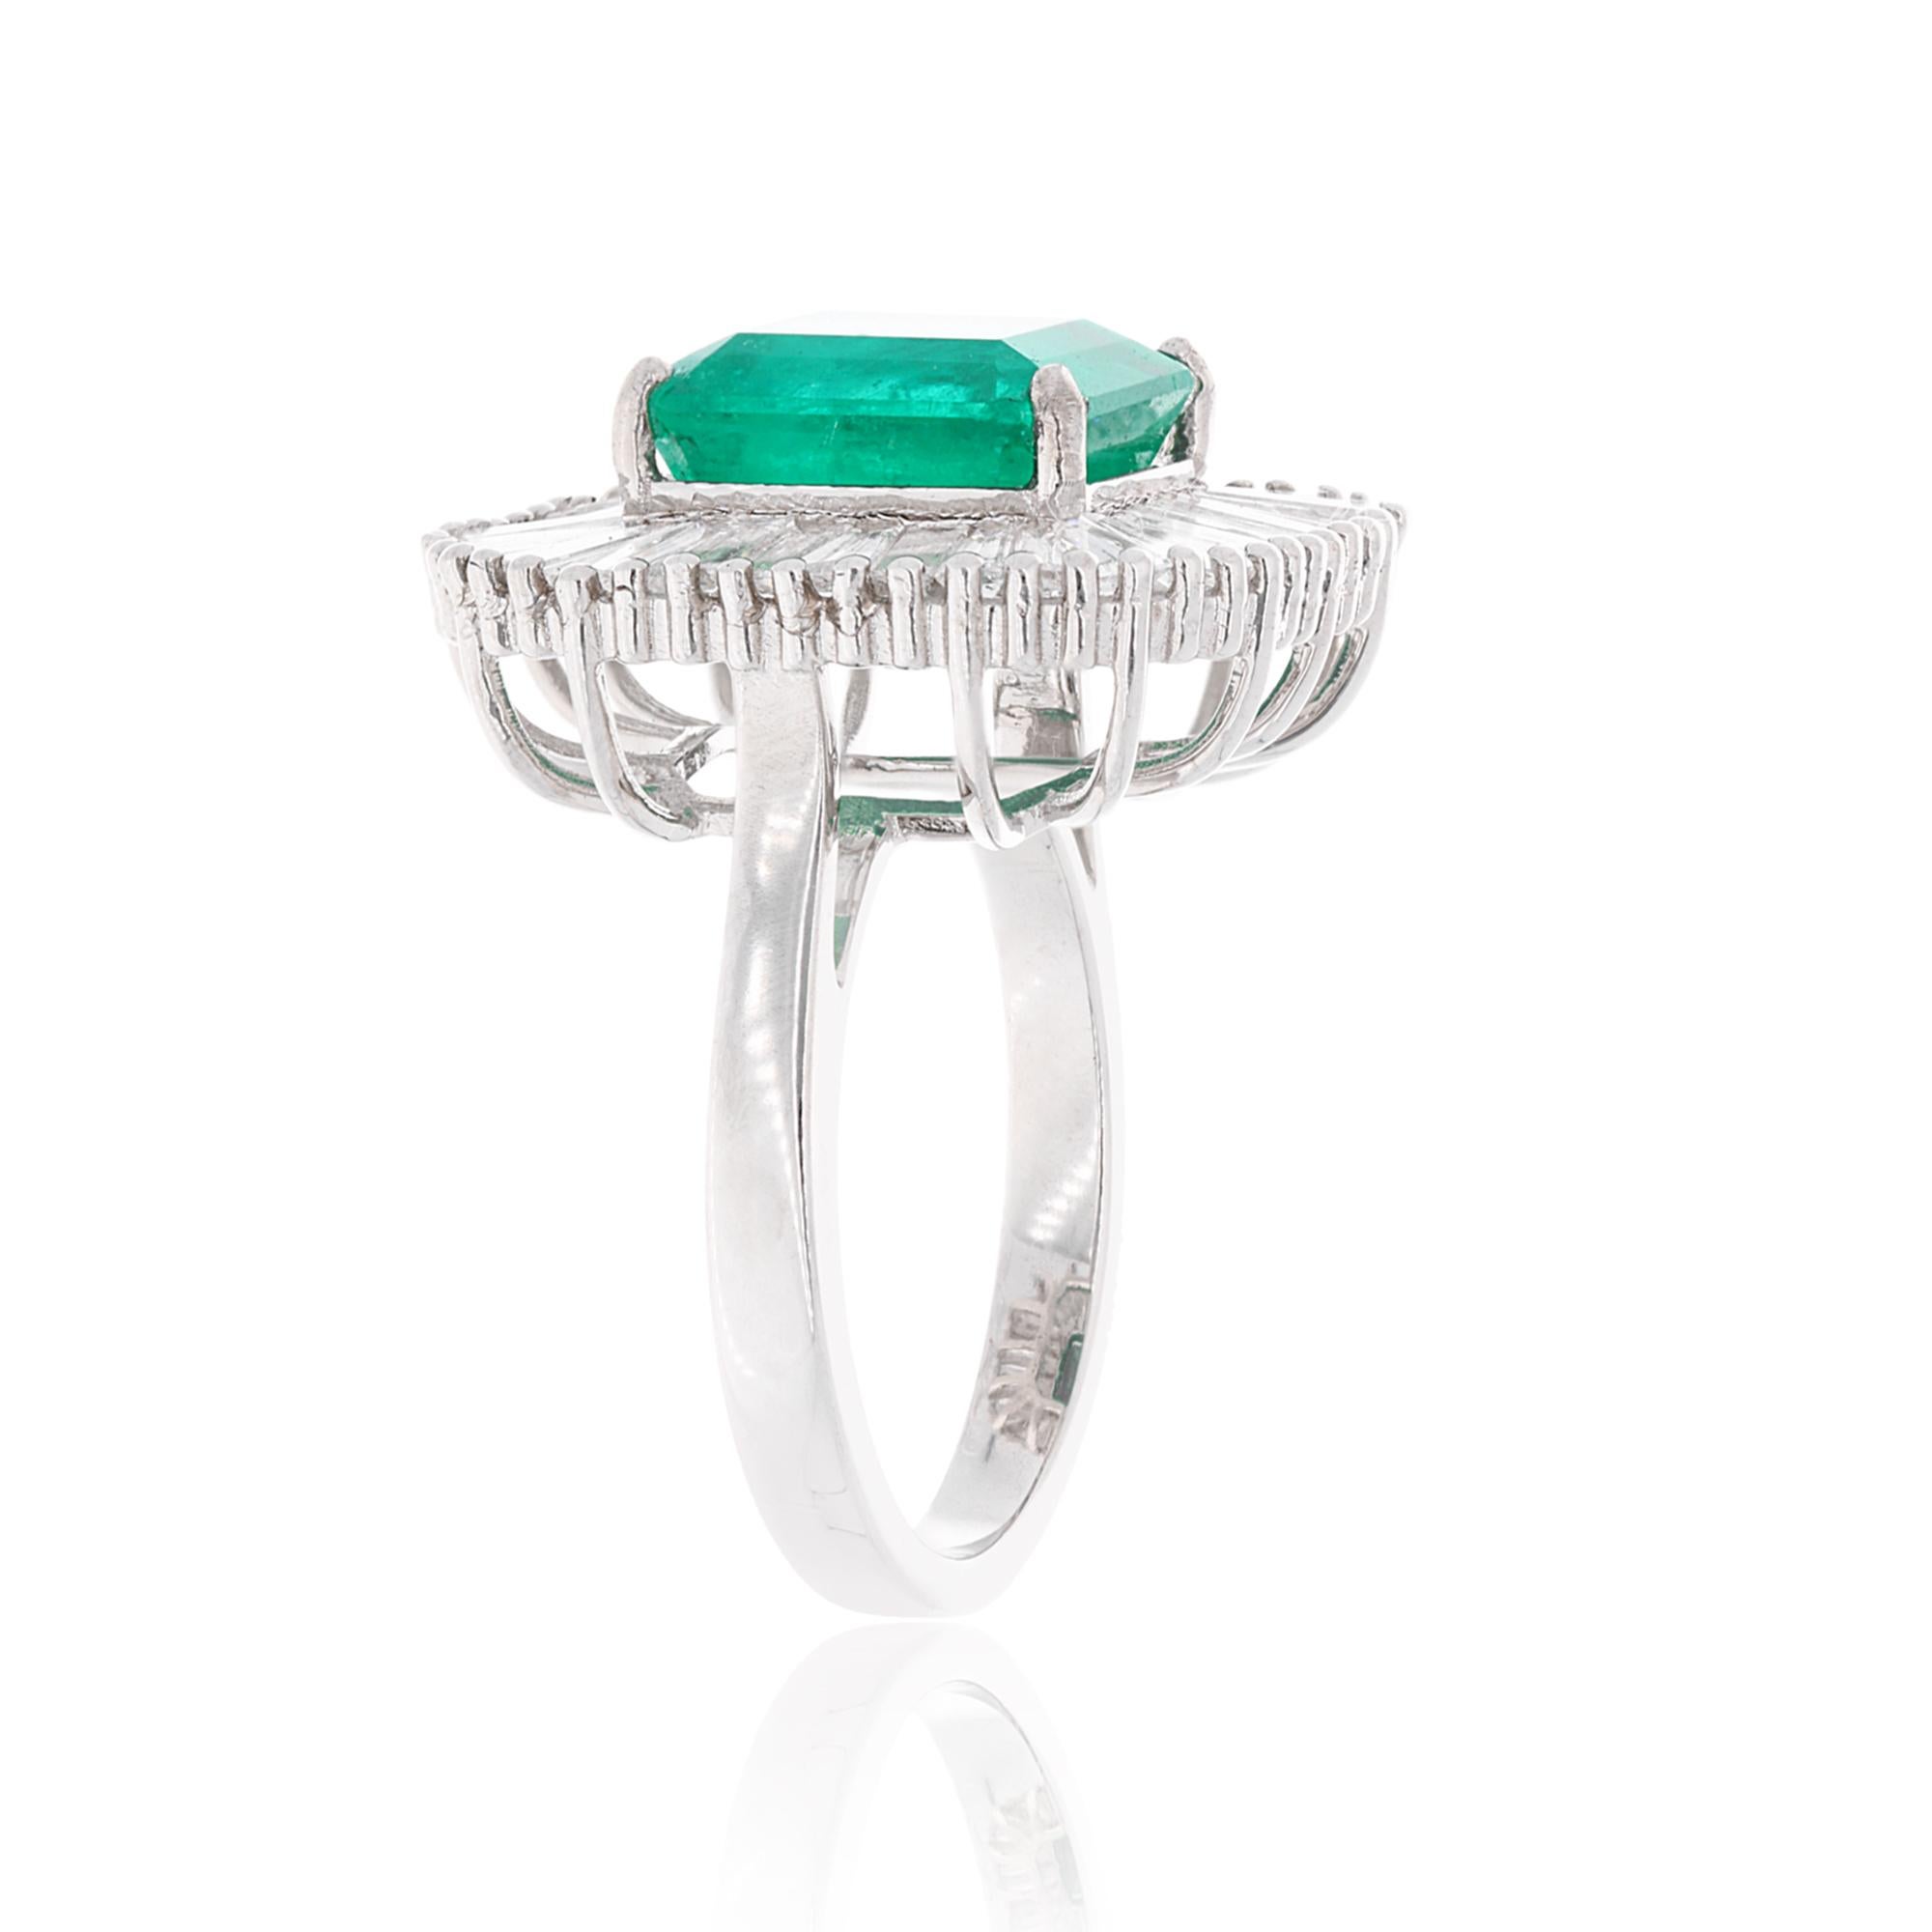 For Sale:  Natural Emerald Gemstone Cocktail Ring Baguette Diamond 18k White Gold Jewelry 3